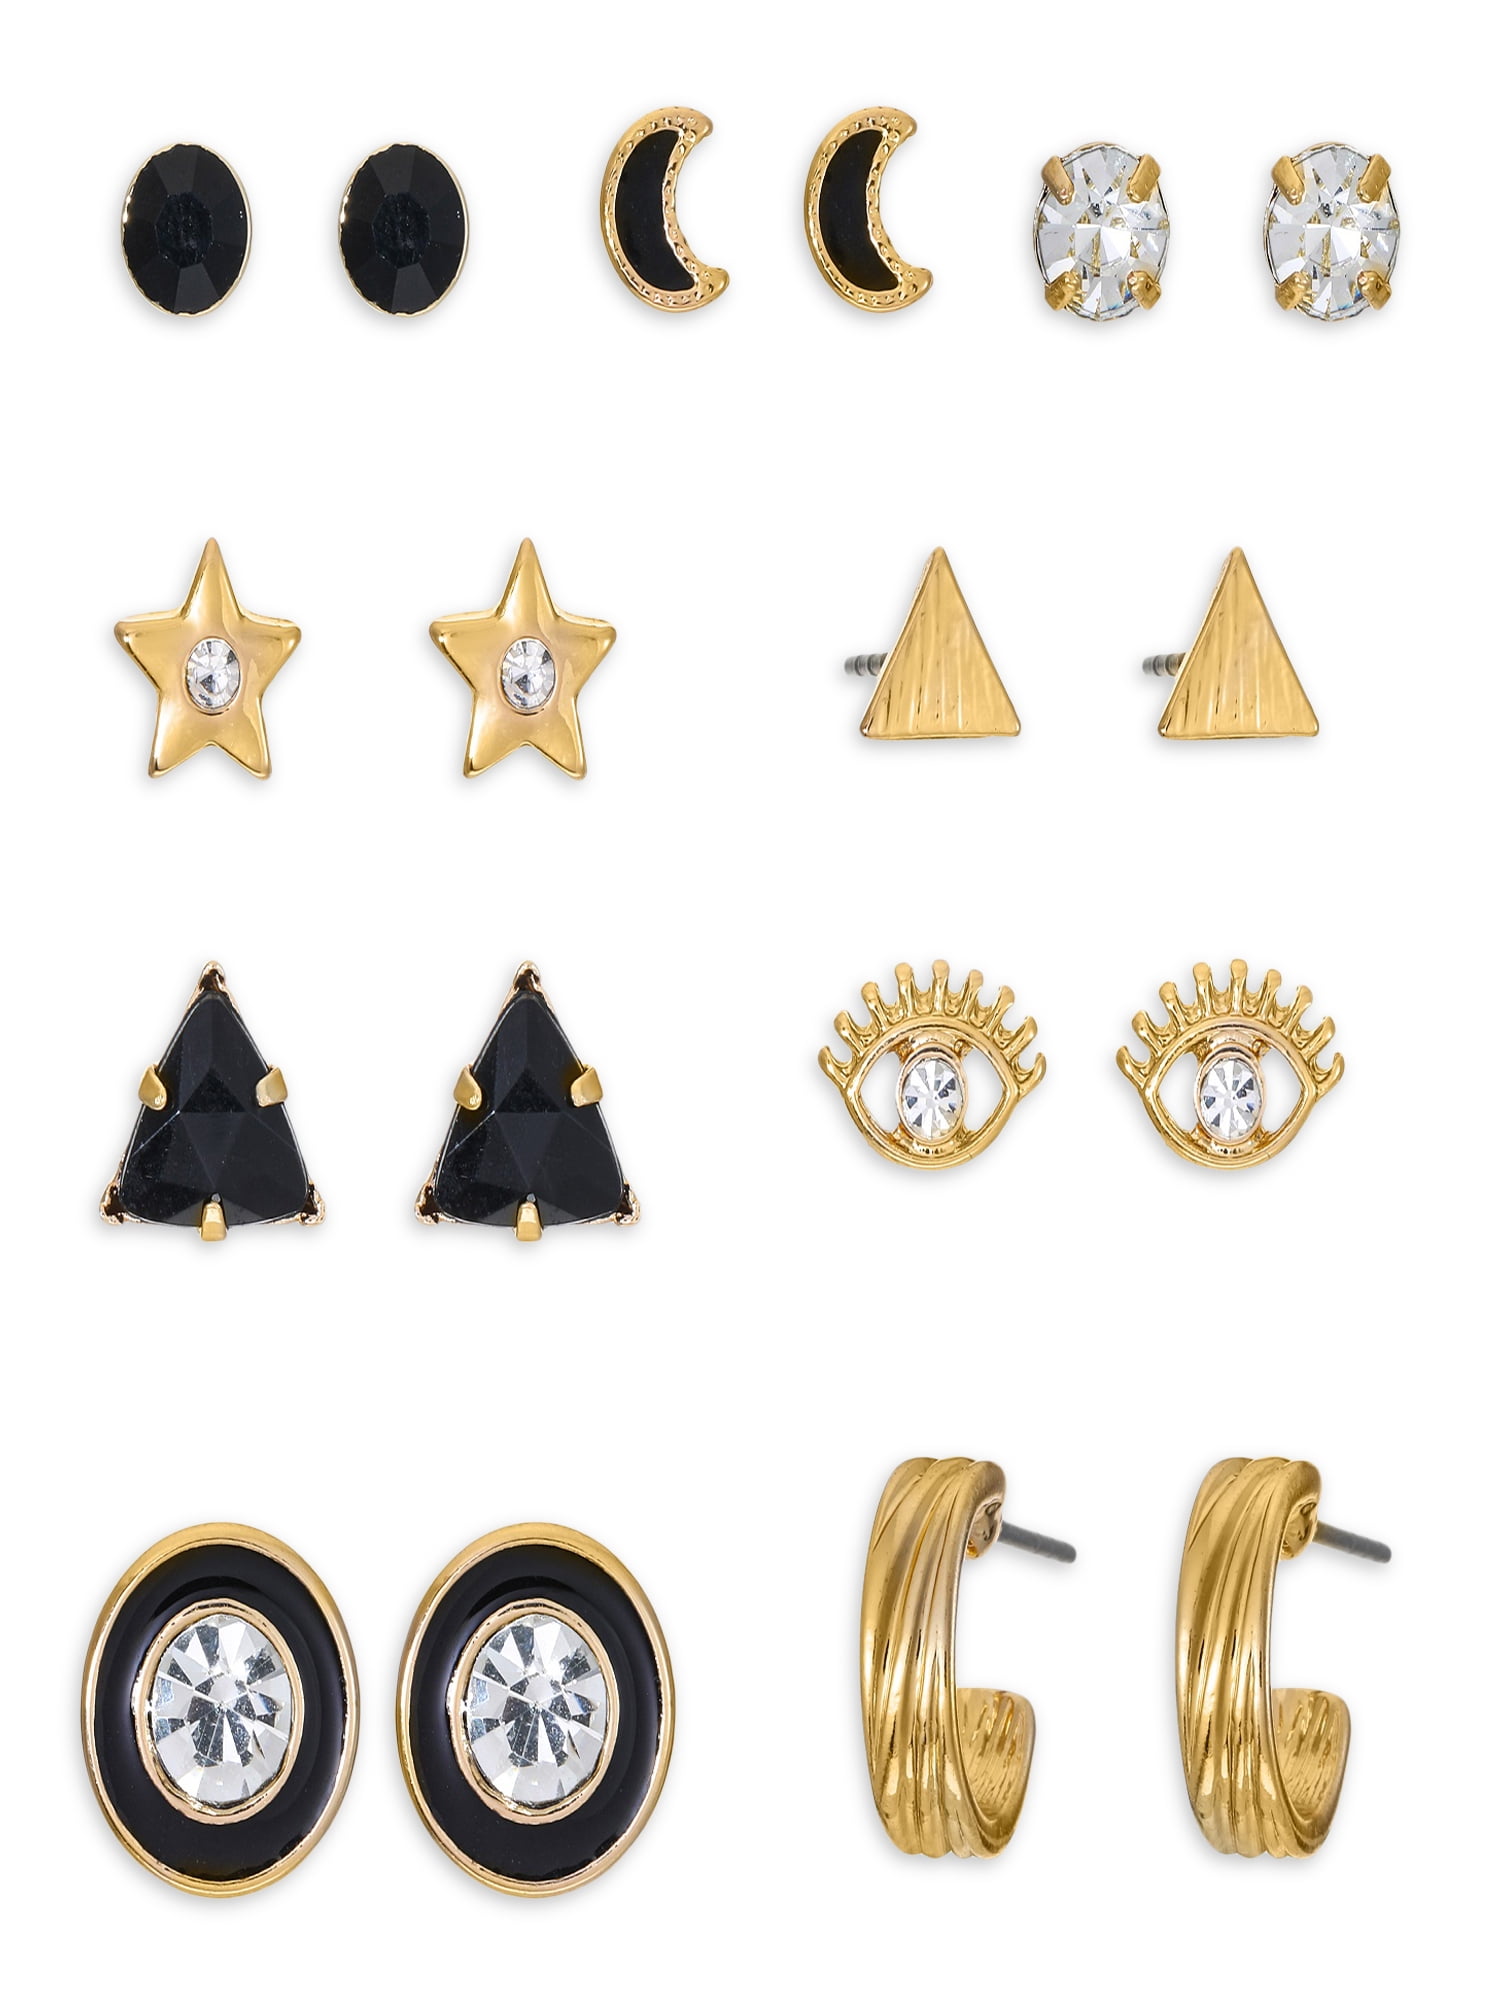 Women's Jewelry Stud Earring Collection, 9 Pairs